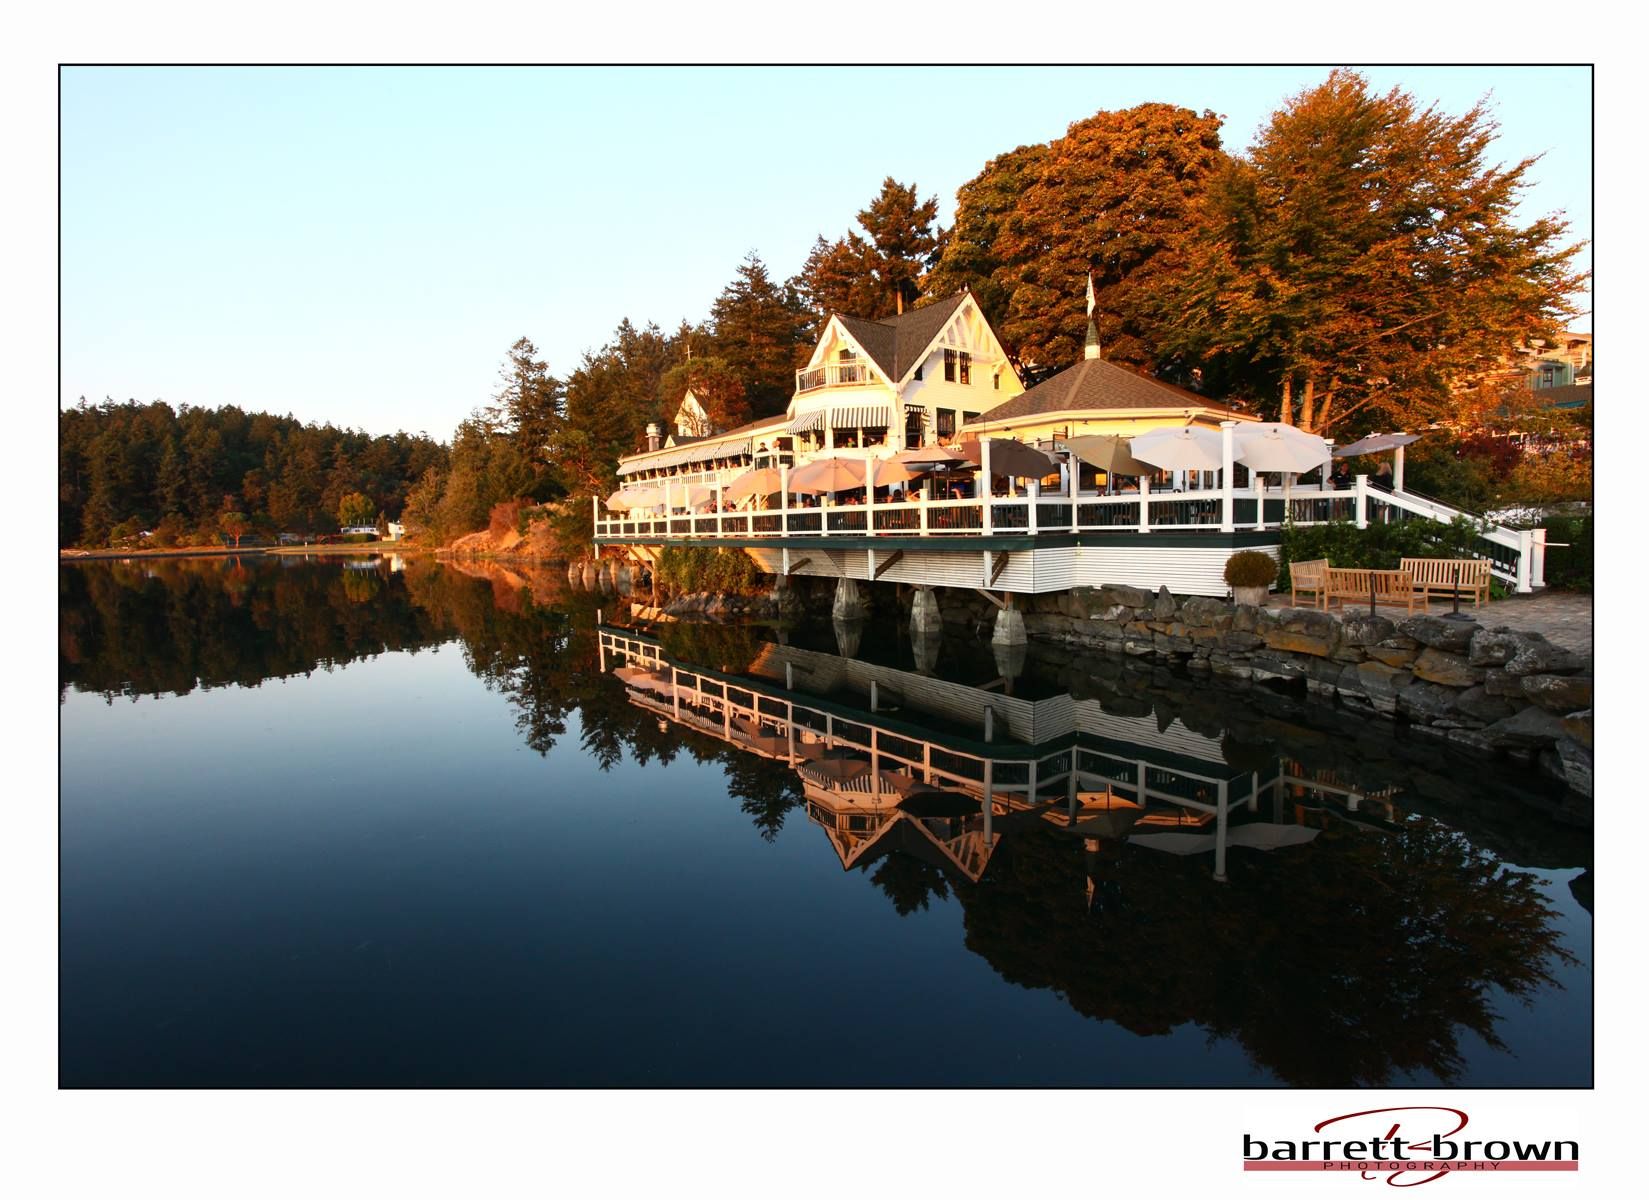 The Wedding Venue on the Lake